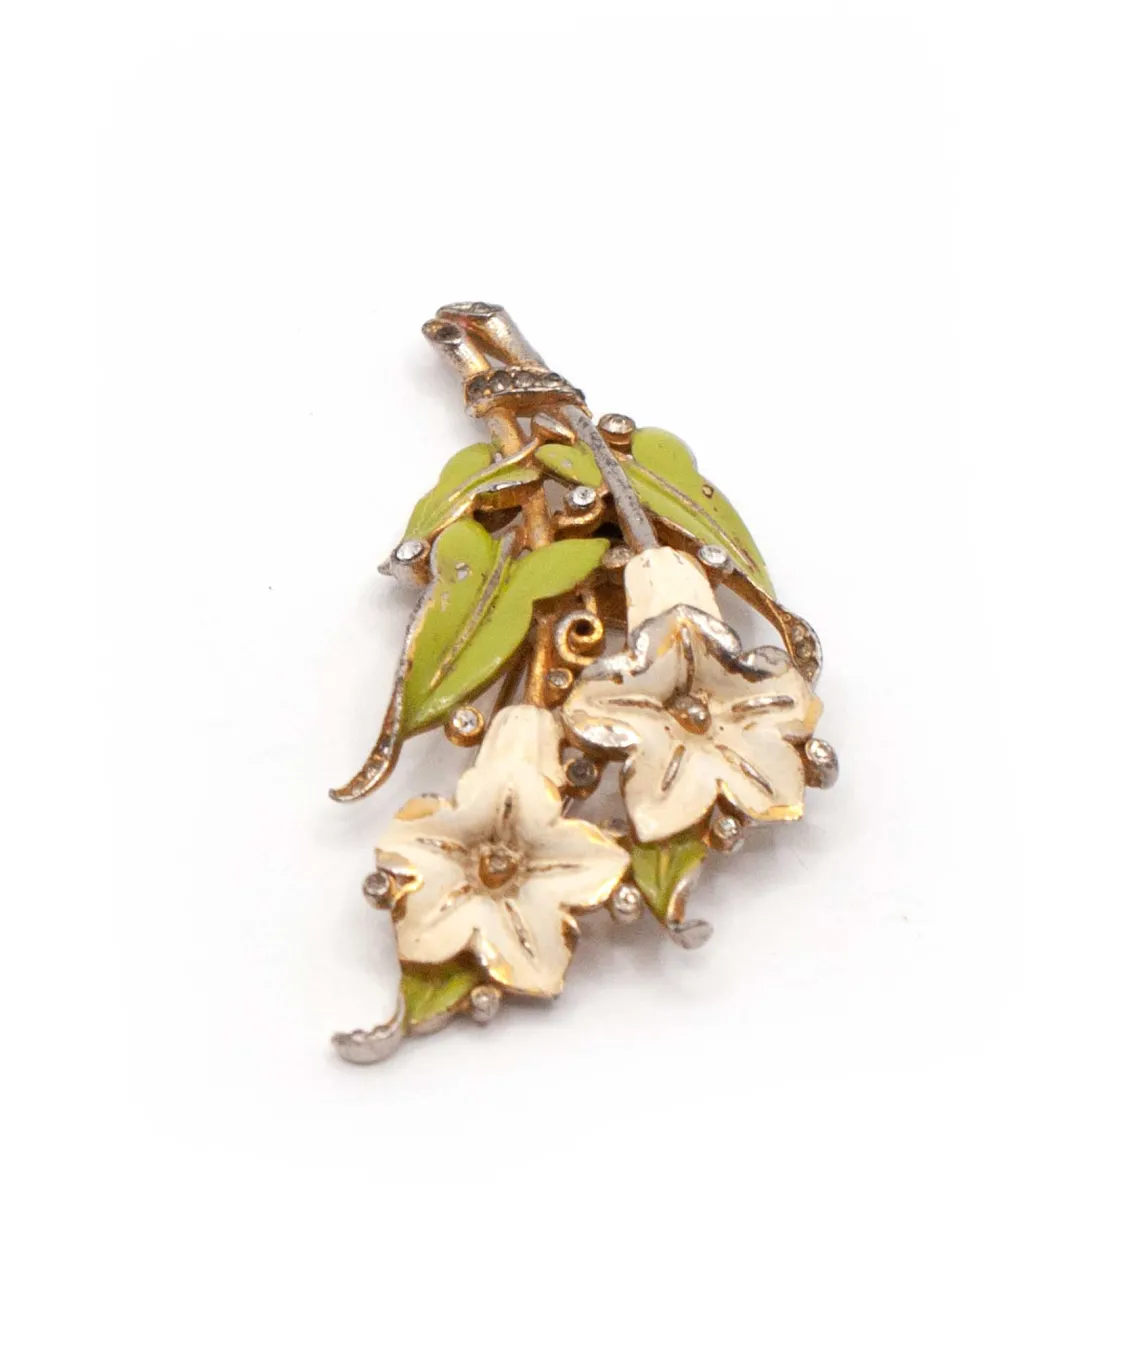 Top side view of enamel brooch with green leaves and two ivory flowers